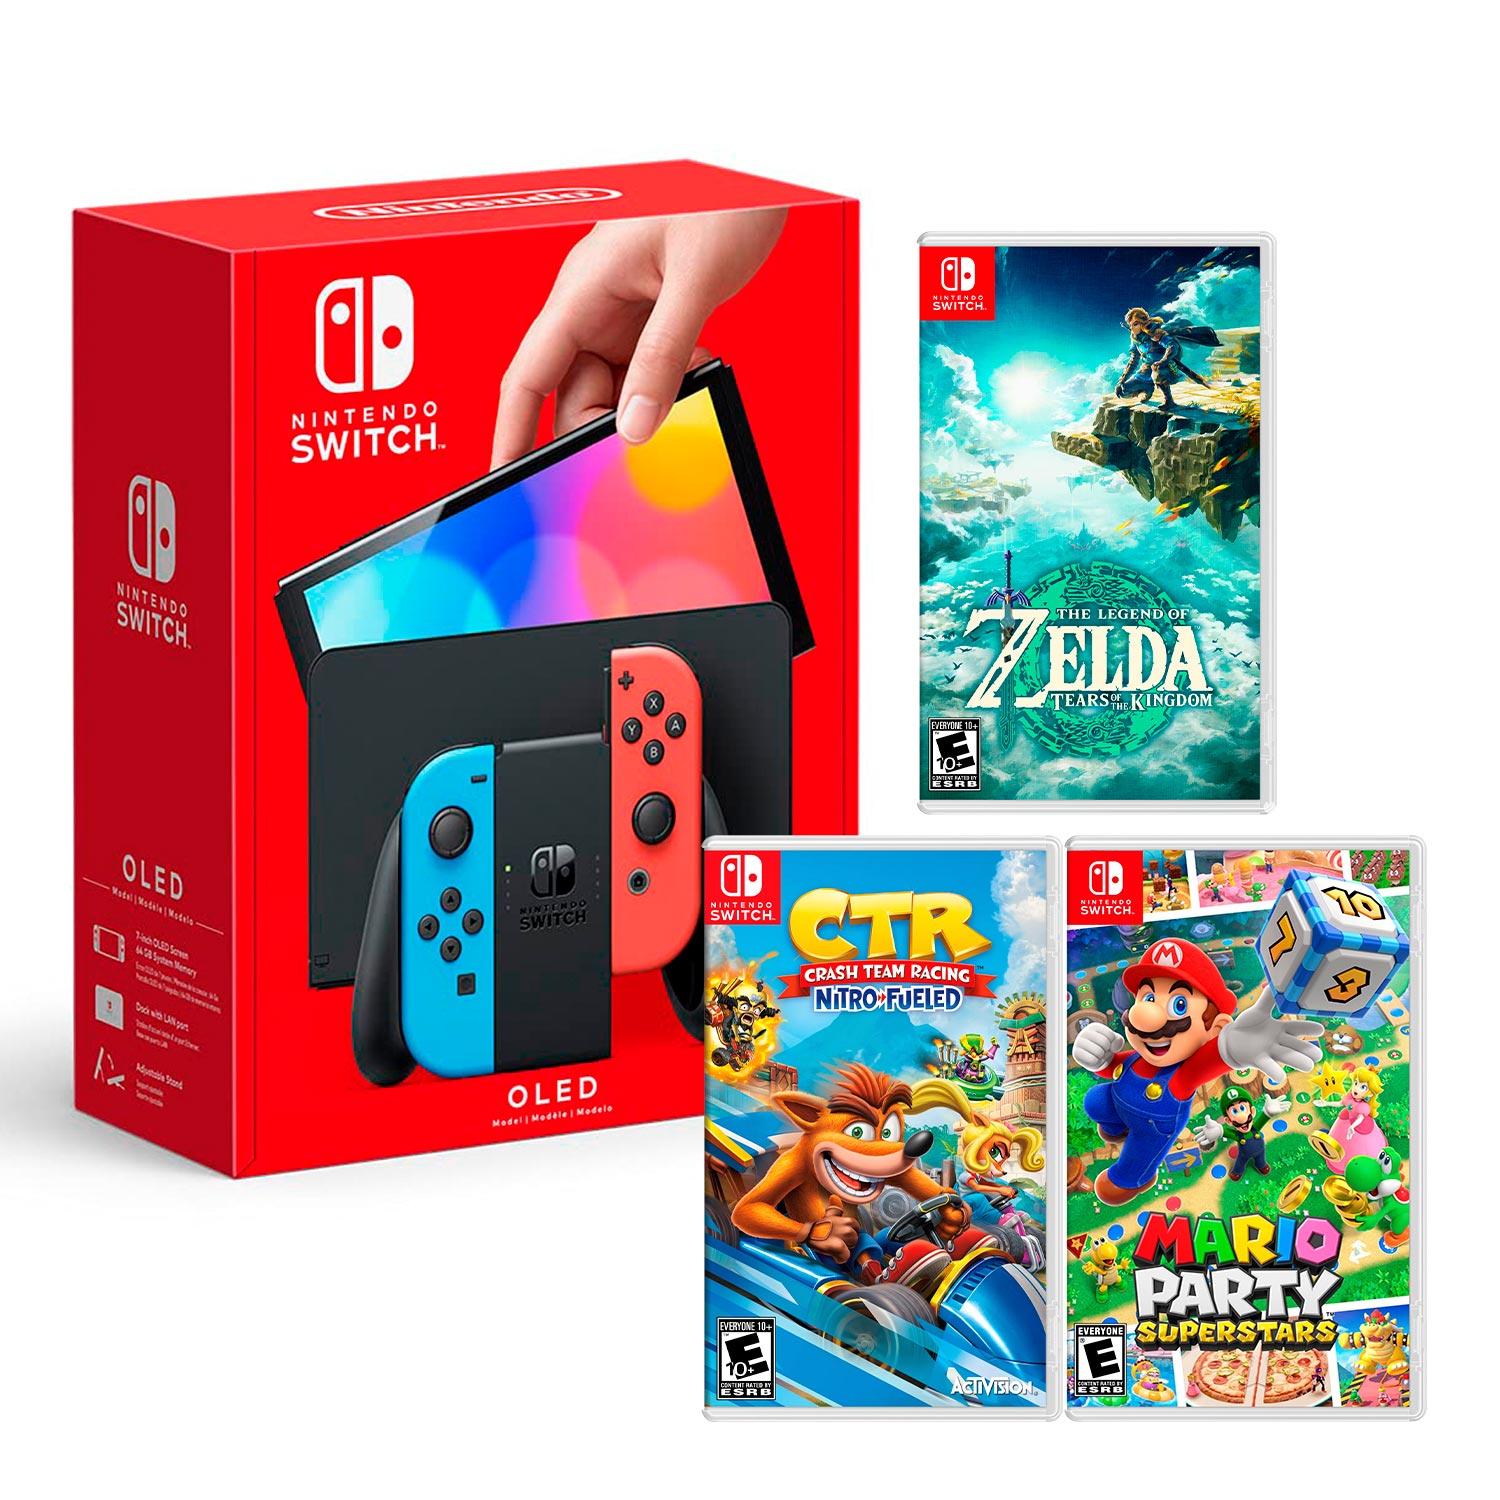 Consola Switch Oled Neon + Zelda Tears Of The Kingdom + CTR + Mario Superstar